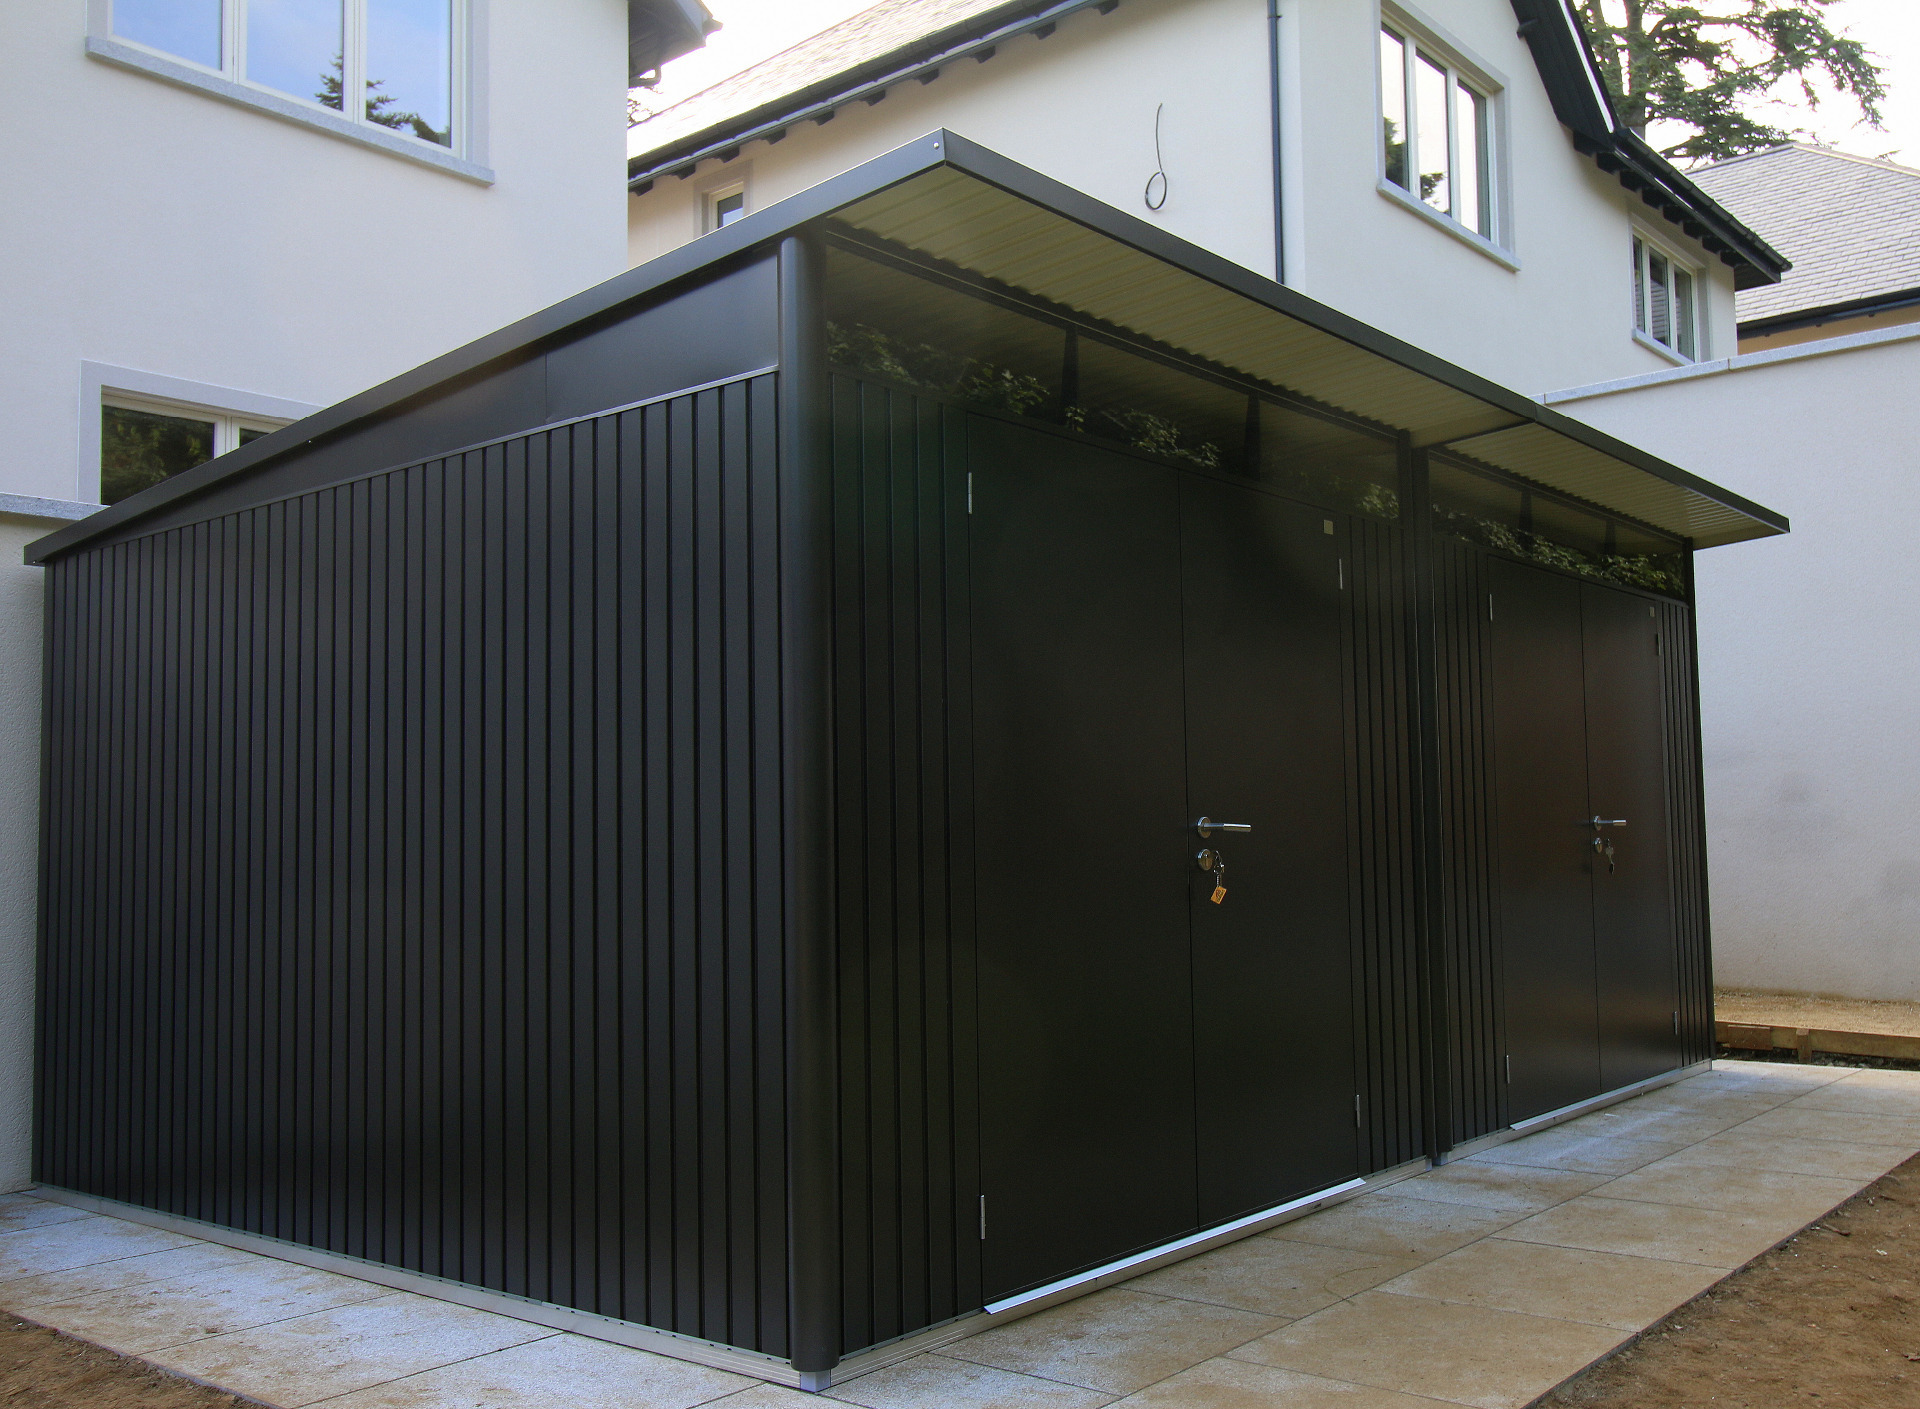 Biohort AvantGarde A8 Garden Shed - a stunning example of contemporary steel garden shed design | Supplied + fitted in Enniskerry, Co Wicklow | Owen Chubb Garden Landscapers, Tel 087-2306128.